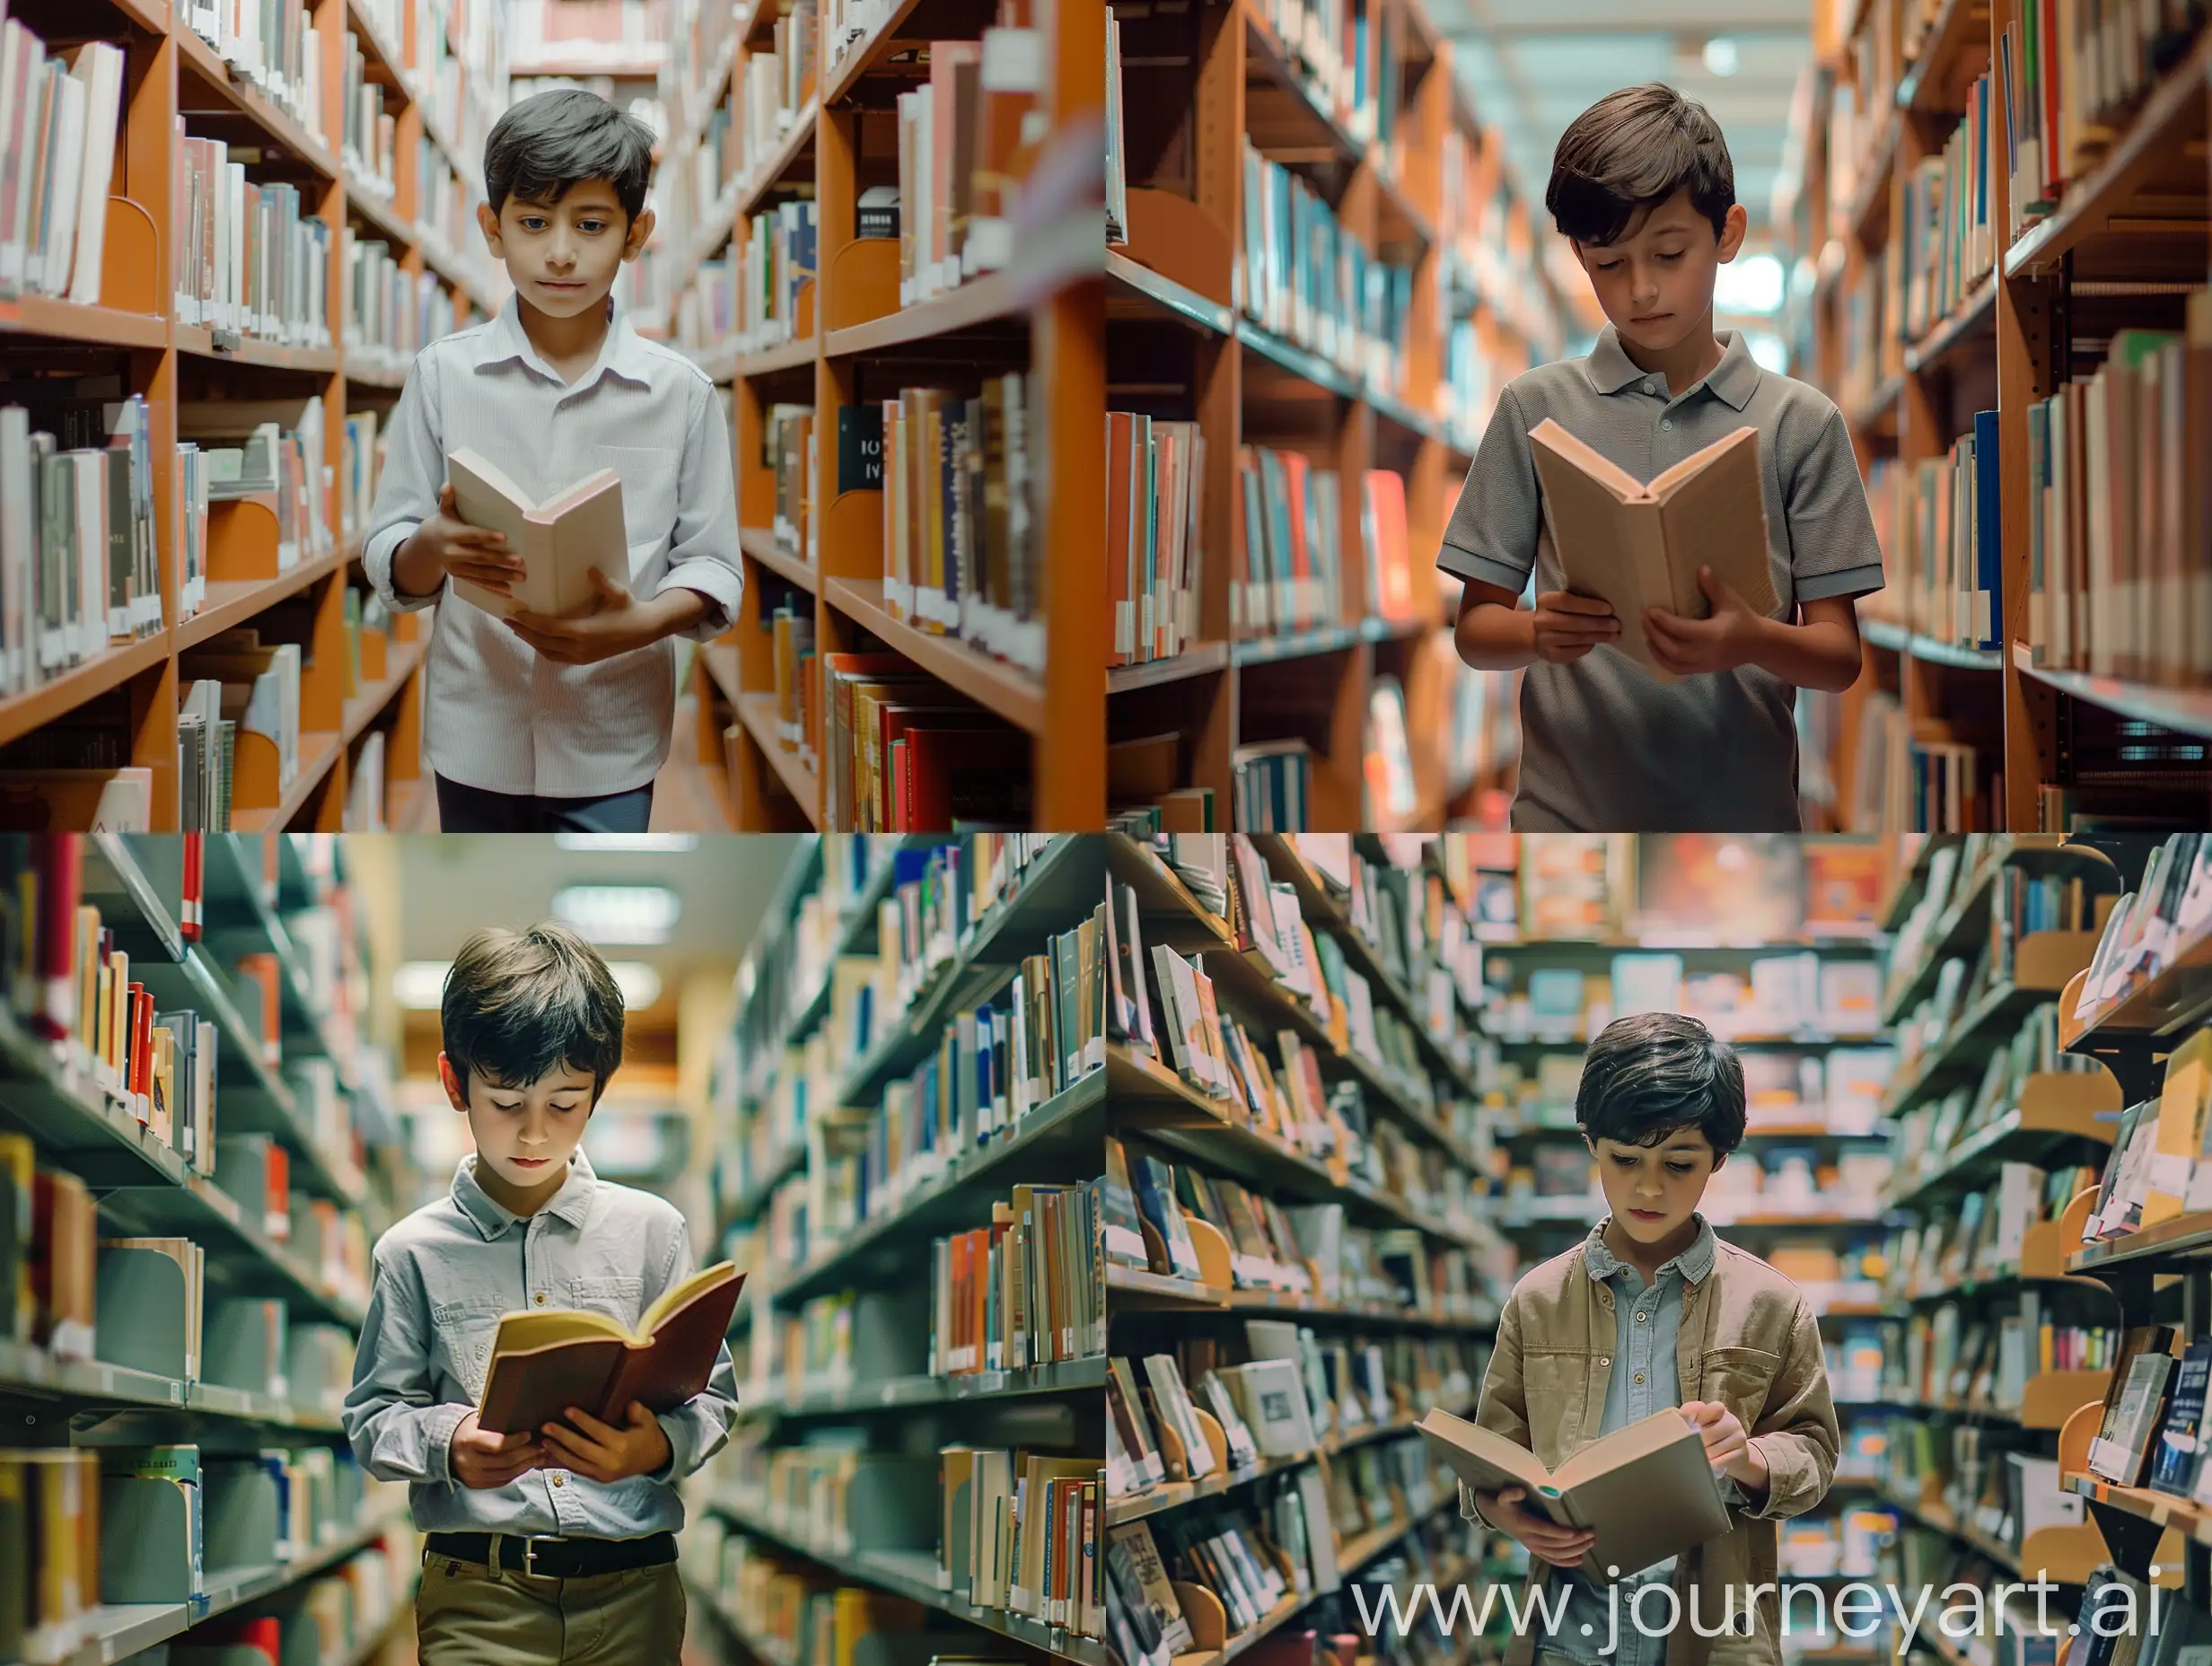 A 10 years boy dark hair  holding a book in a library, and walking between the shelves engrossed in his book. While everything around him looks in still (world in still). Wide shot 35mm film, ARRI. Vivd colors.